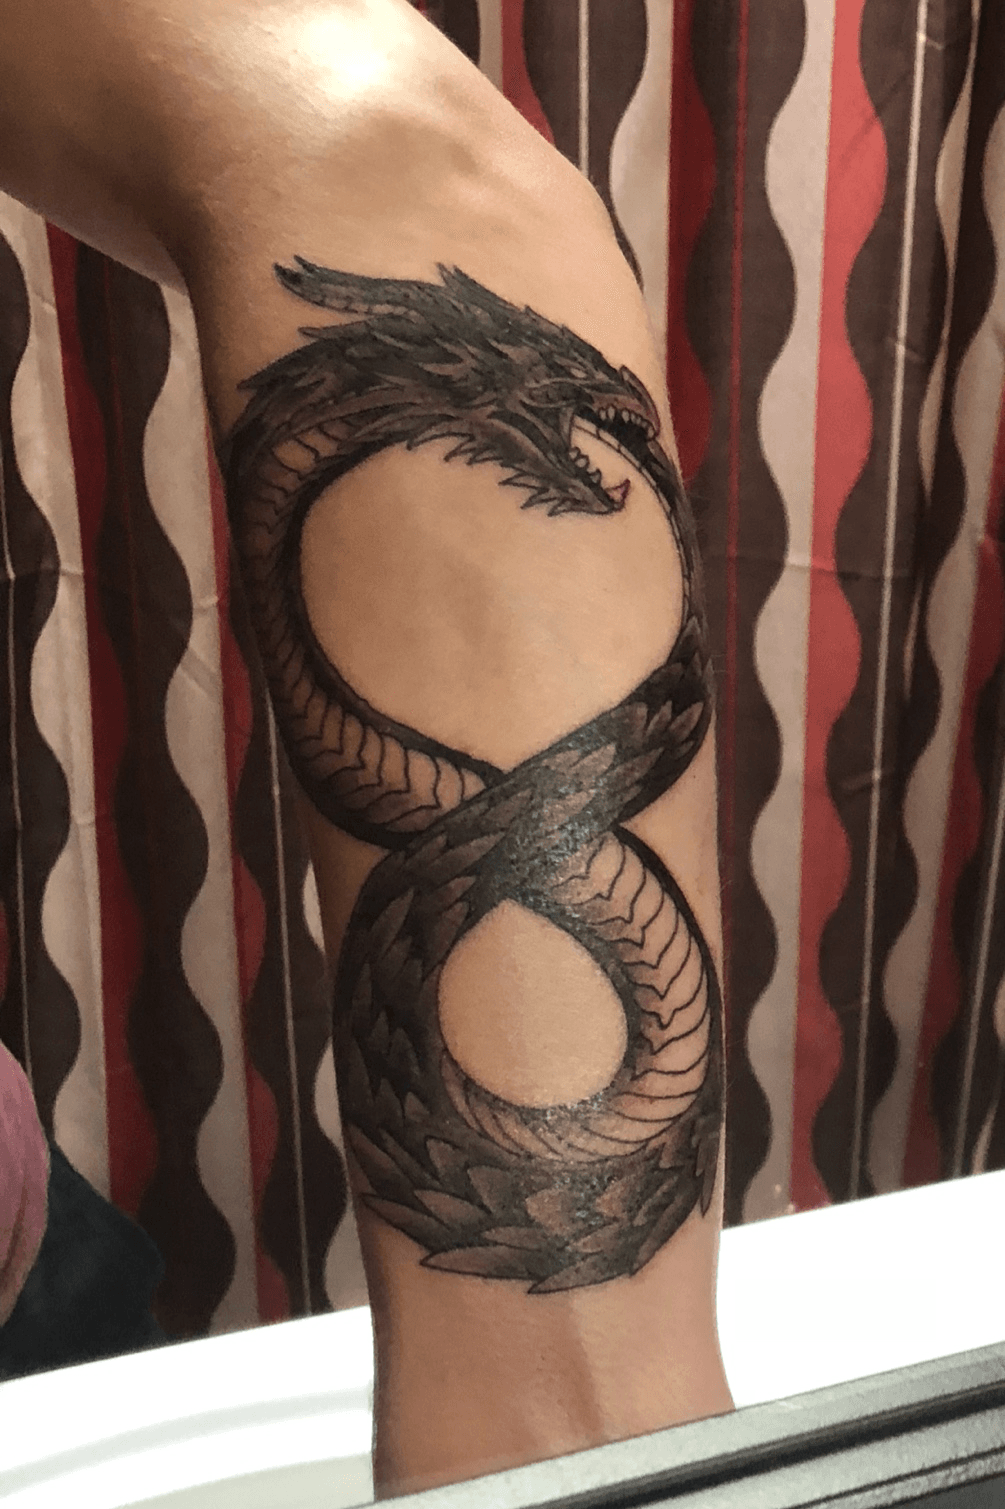 Funny Ways In Which People Altered Their Tattoos After Breakup   Boldskycom